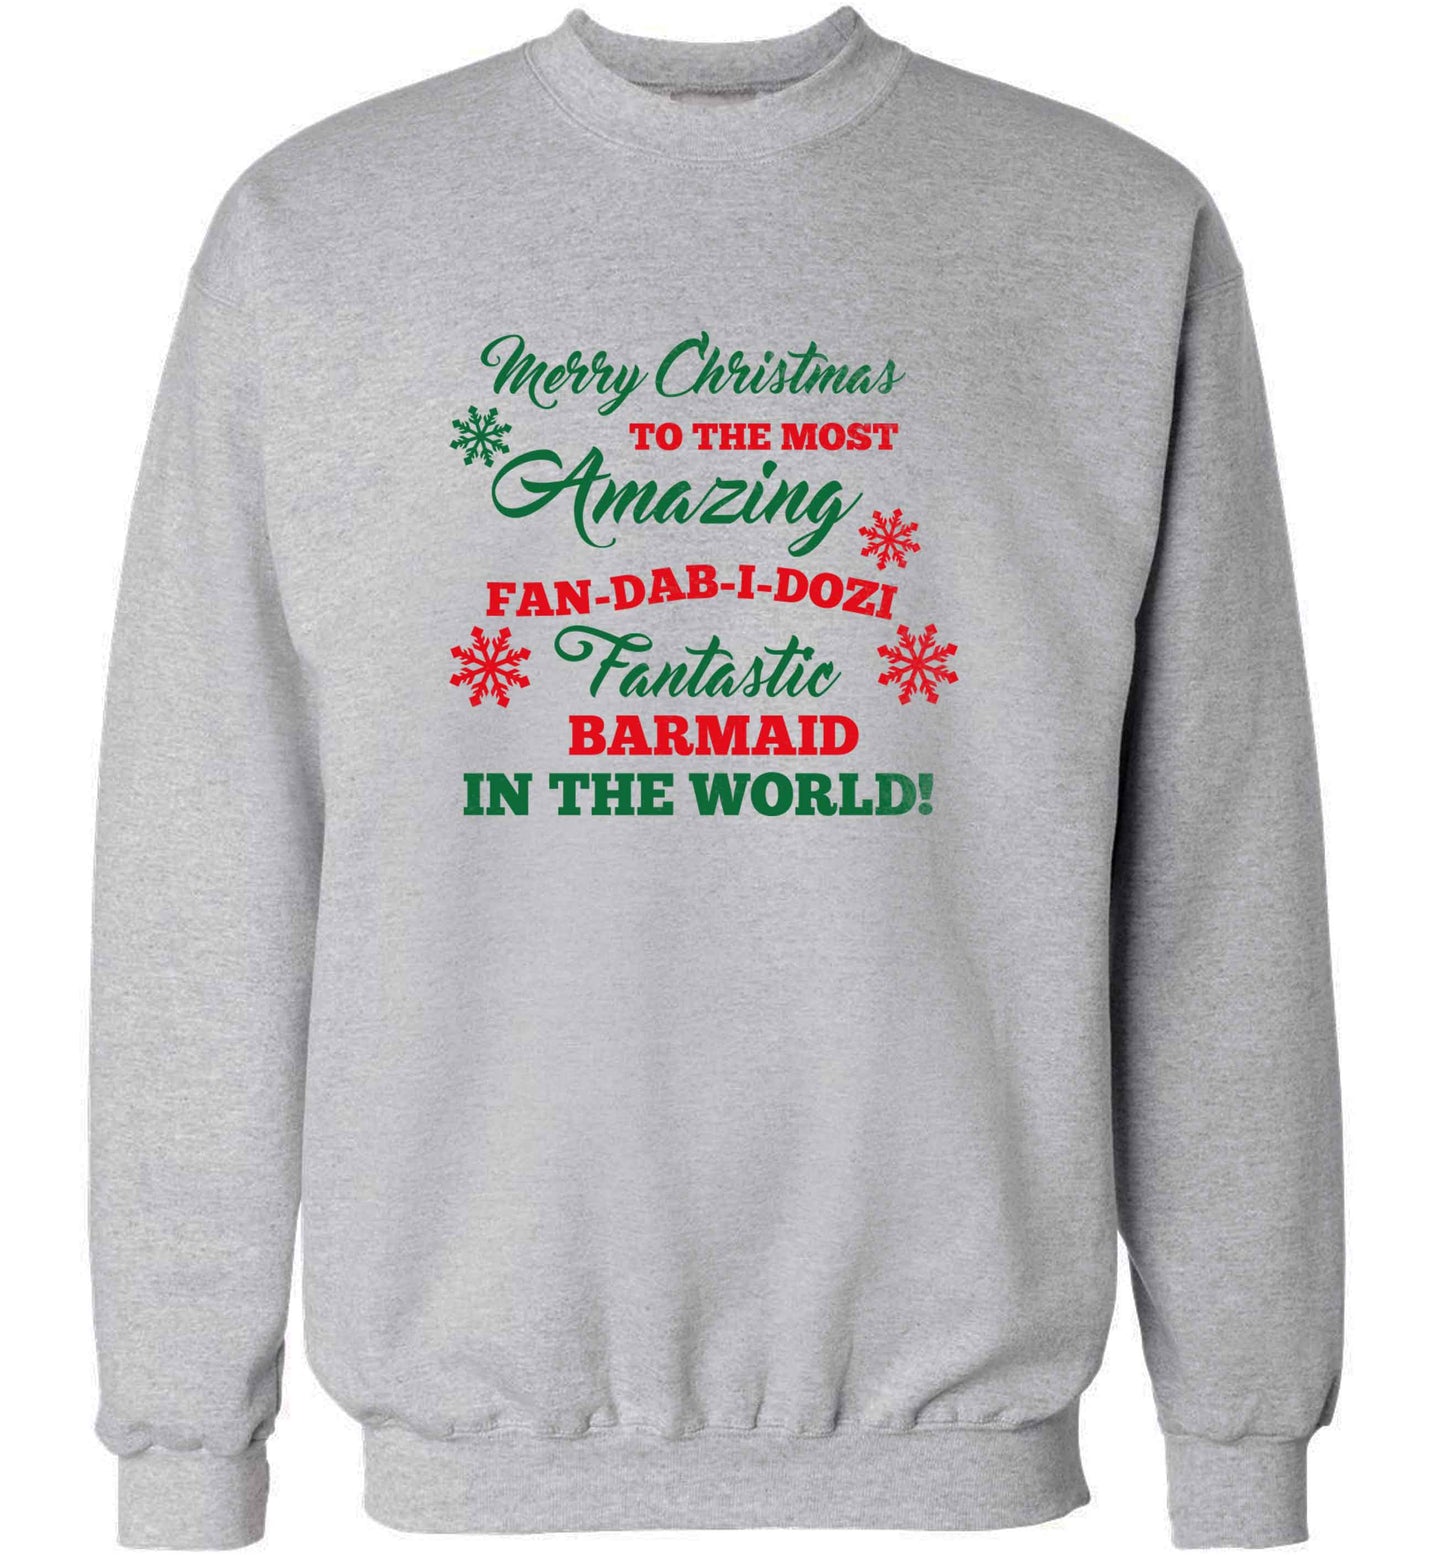 Merry Christmas to the most amazing barmaid in the world! adult's unisex grey sweater 2XL